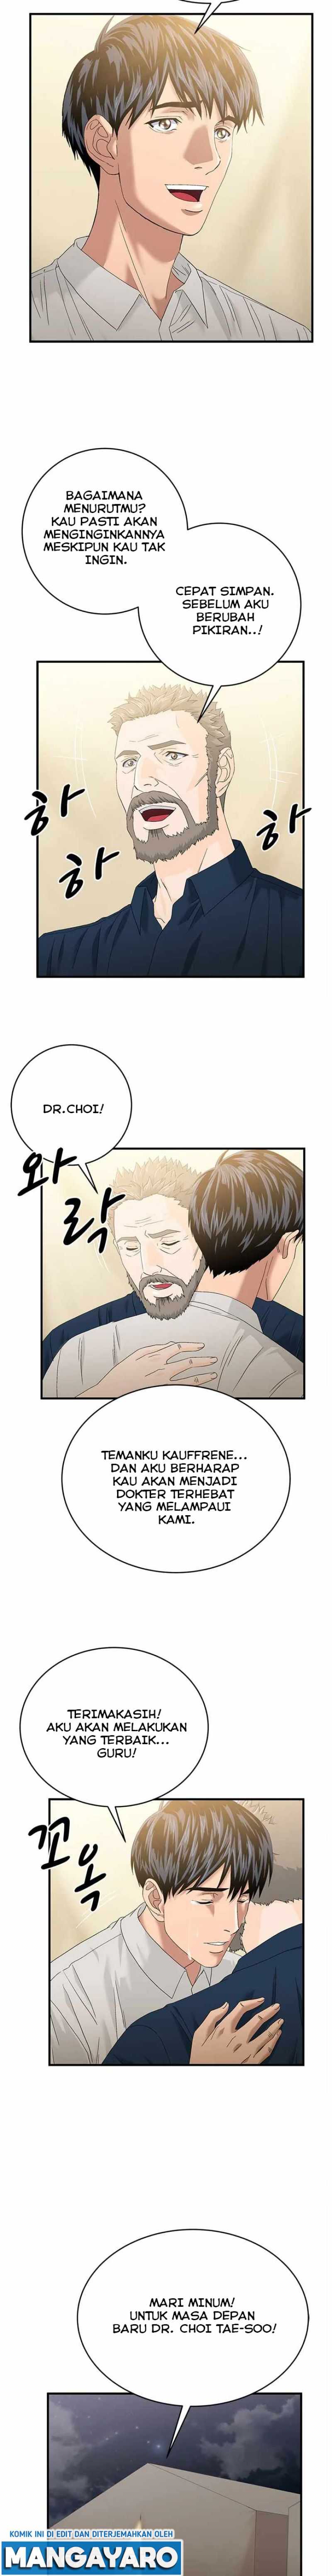 Dr. Choi Tae-soo Chapter 67